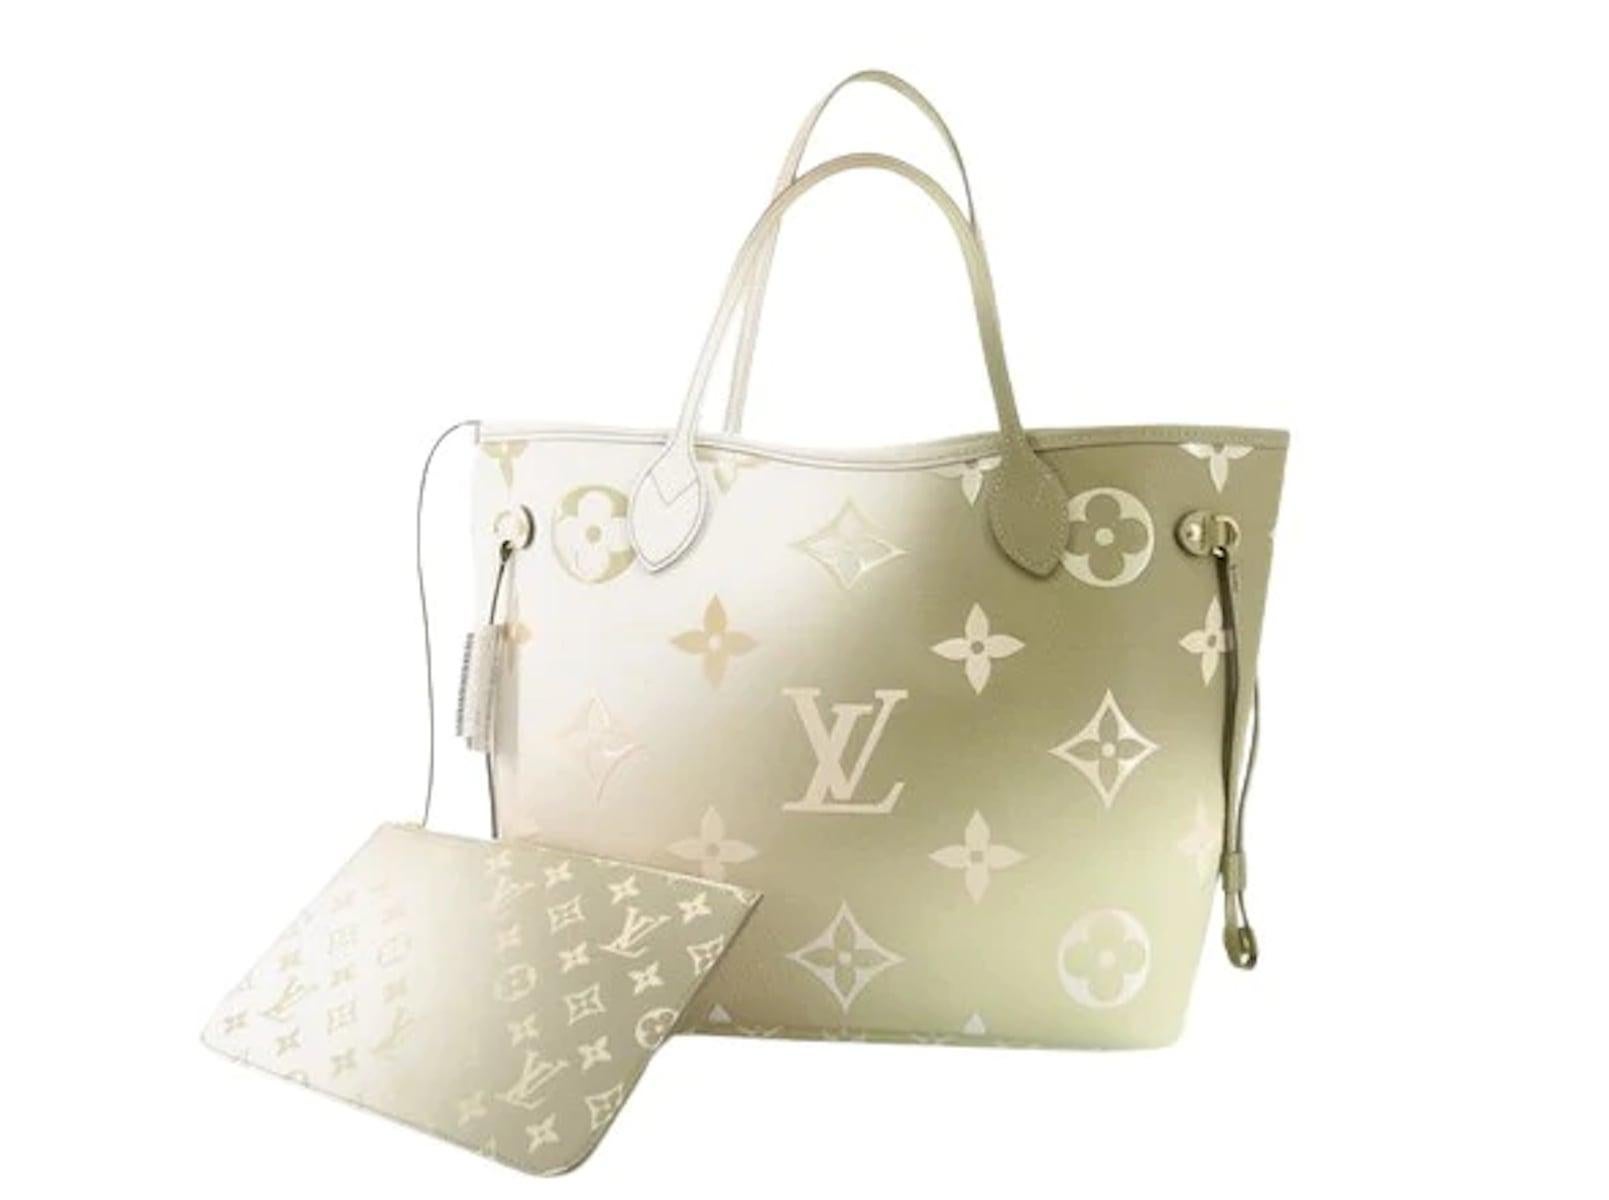 Brand: Louis Vuitton
Model: Neverfull
Color: Green
Material: Leather
Inclusions: Pouch
Dimensions: L 46 x H 29 x D 17
Country of origin: FR
Condition: A - excellent condition.
Presenting the Louis Vuitton Neverfull:
Externally, this iconic Louis